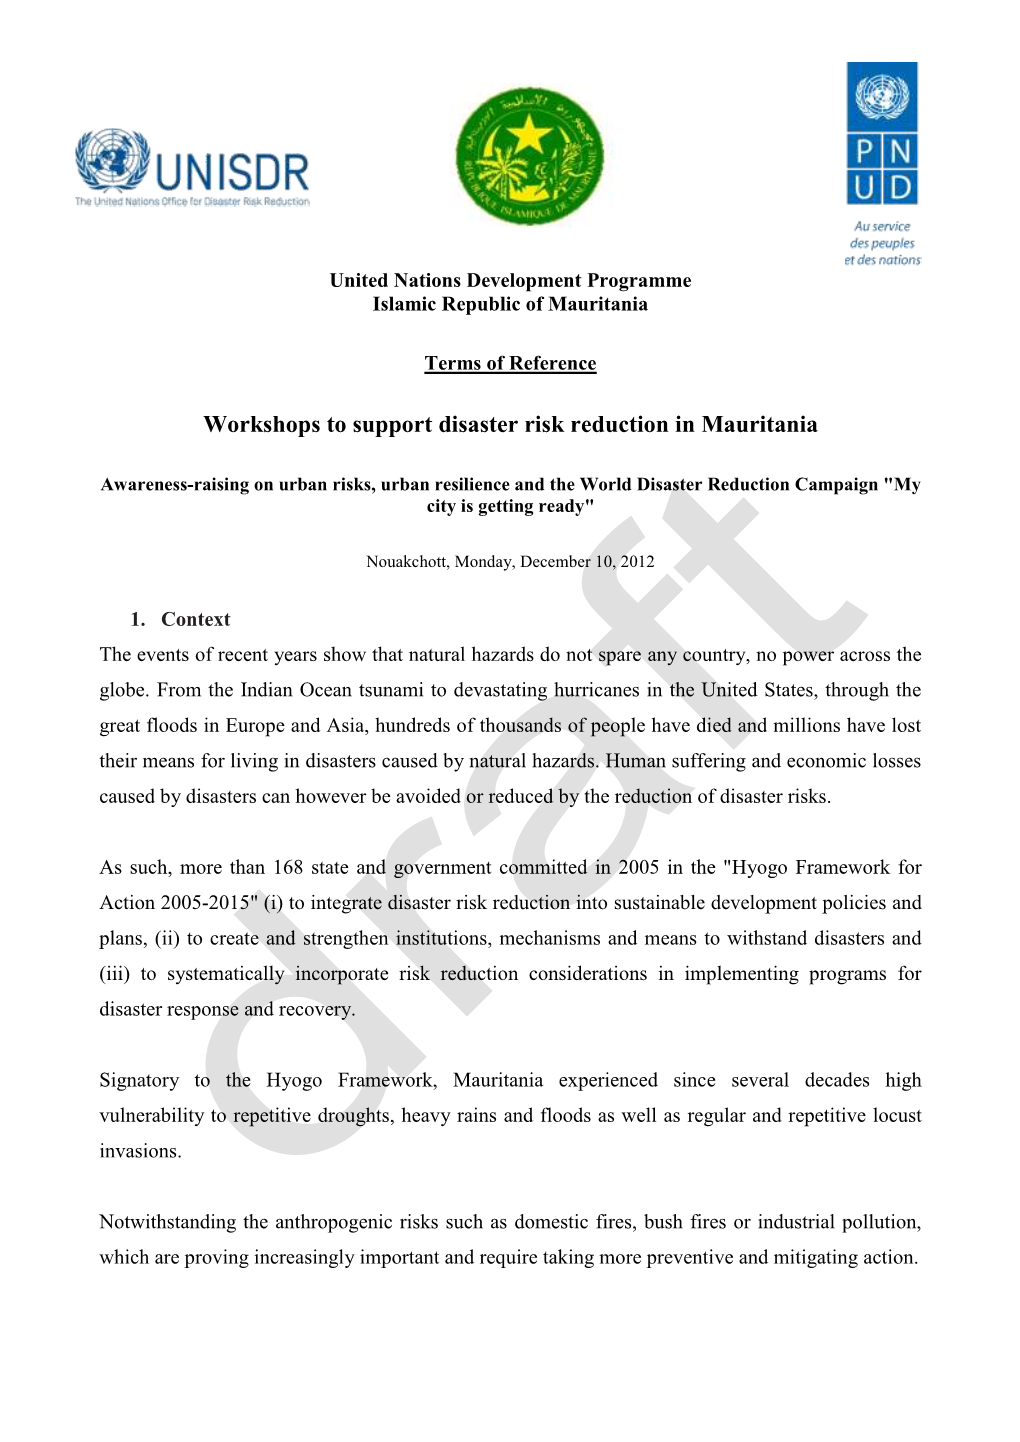 Workshops to Support Disaster Risk Reduction in Mauritania